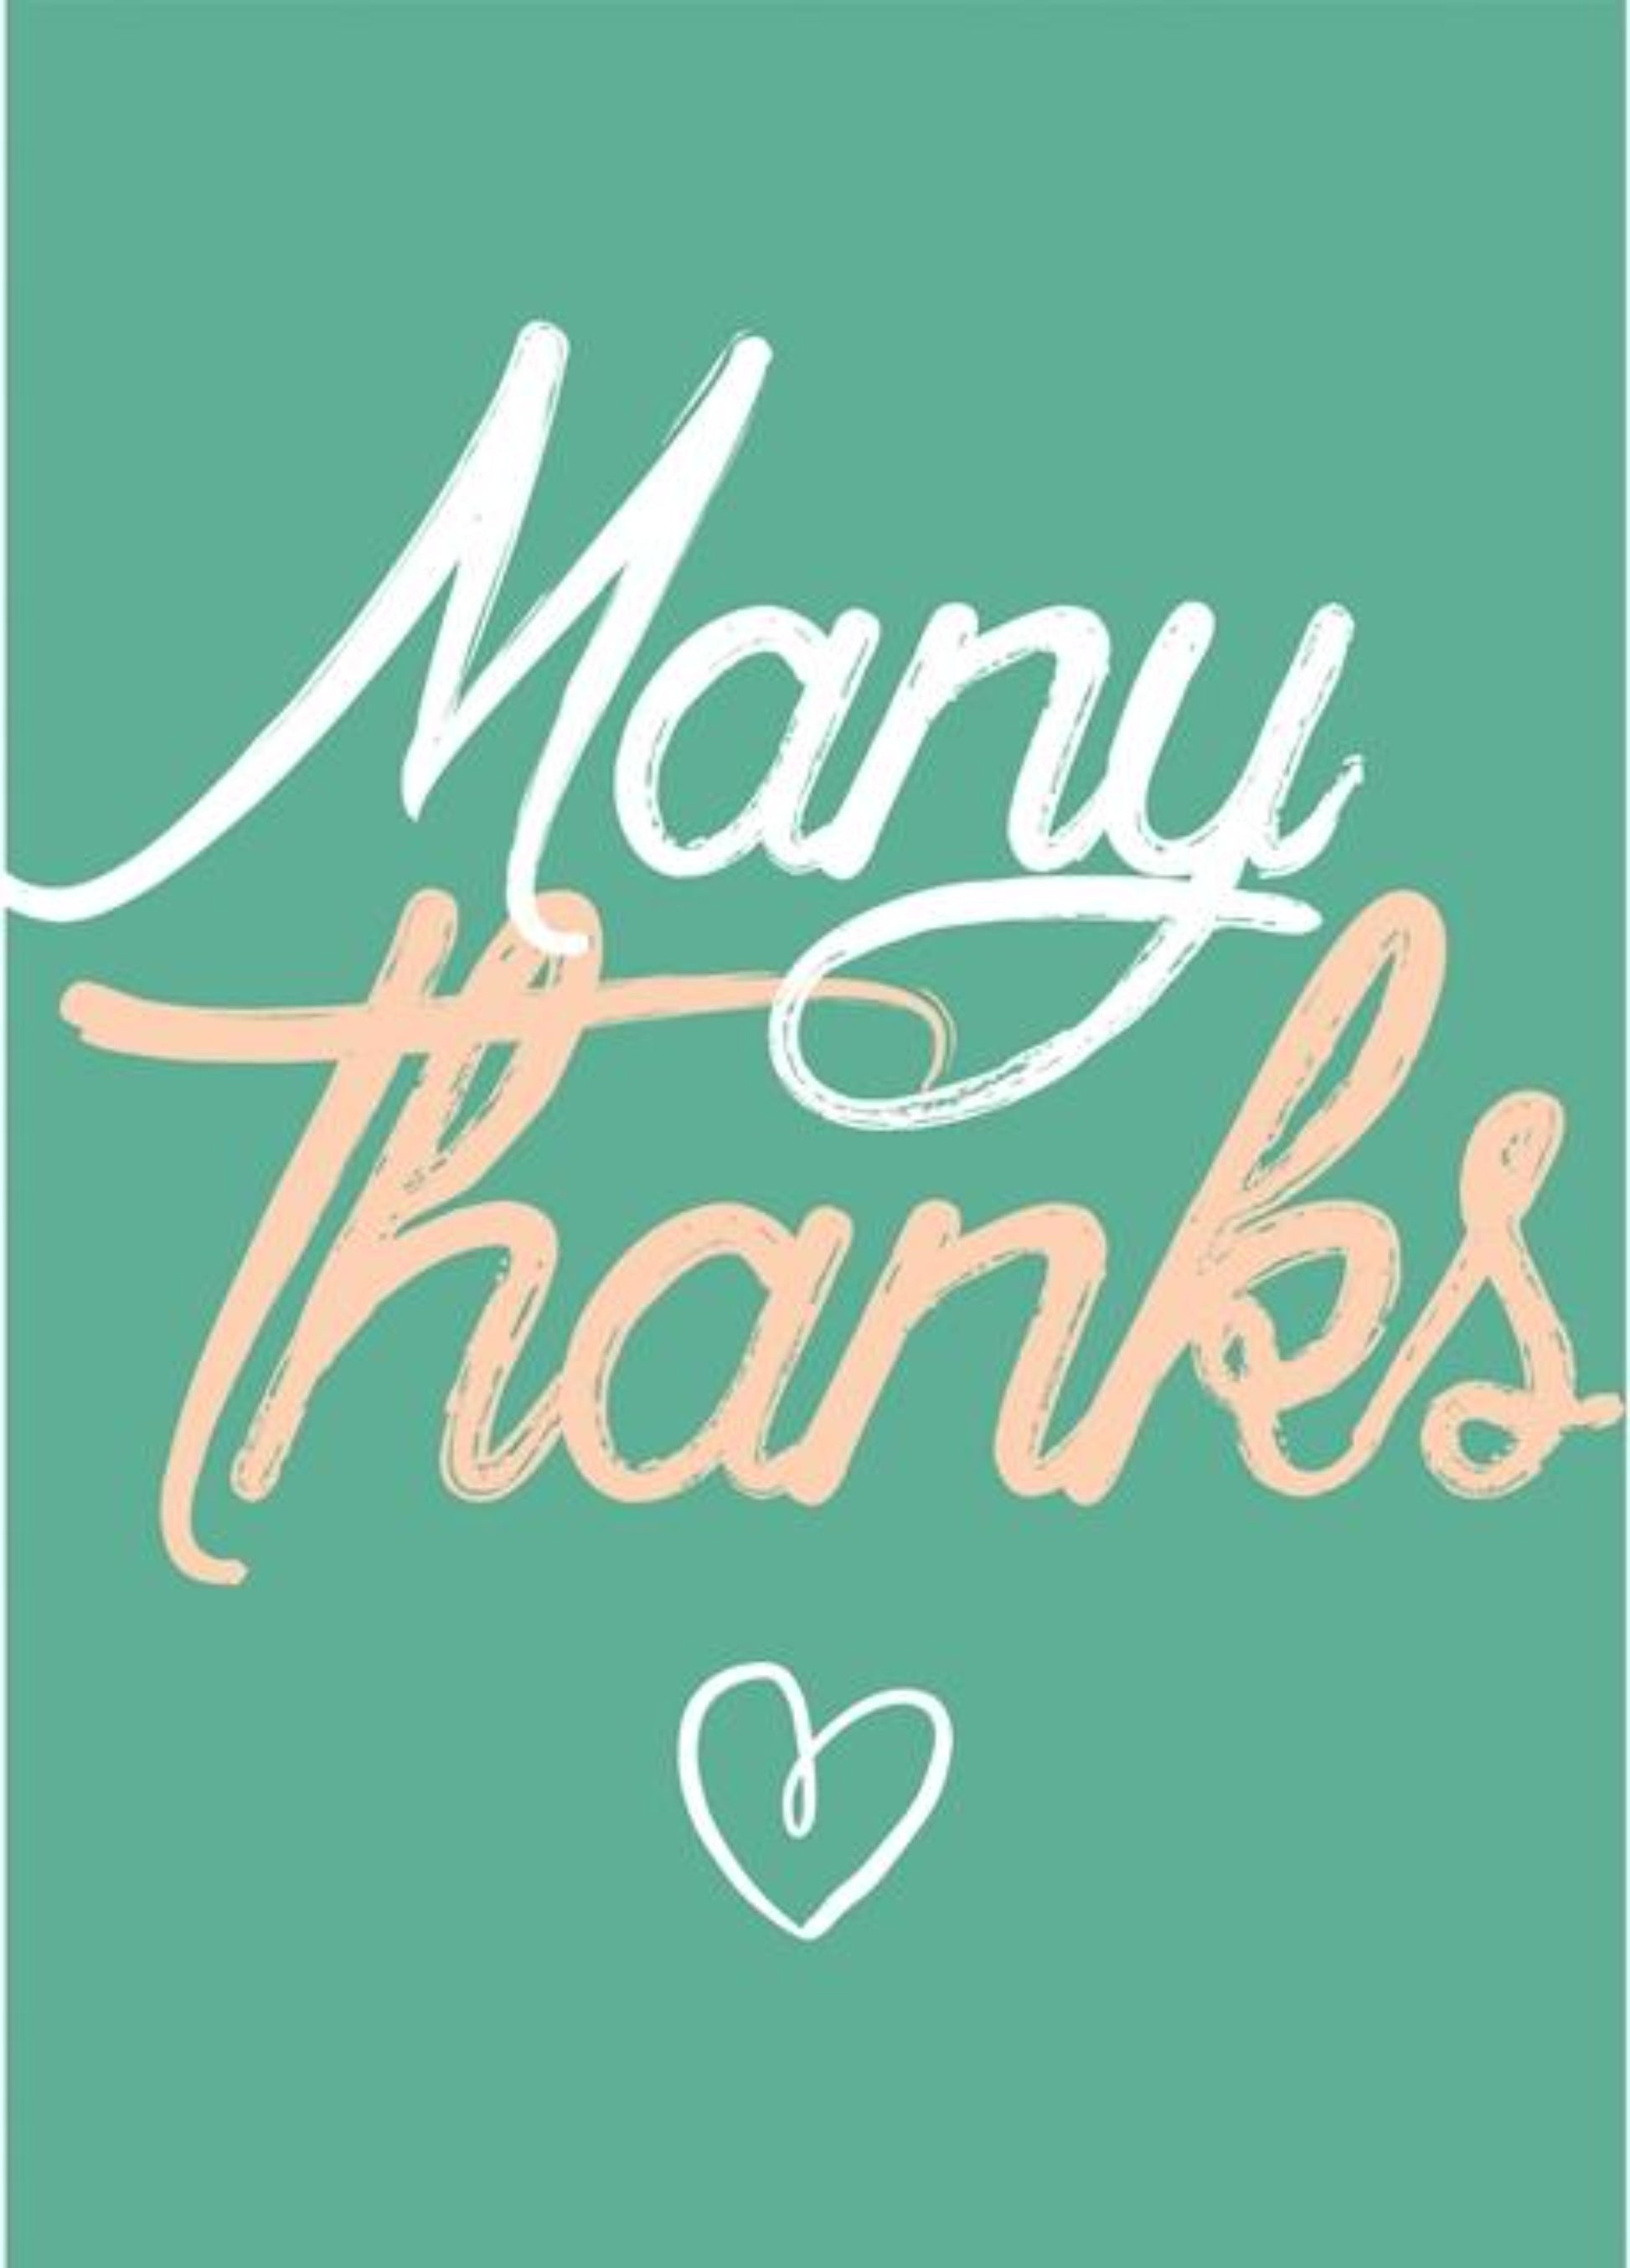 Many Thanks - Thank You Greeting Card.